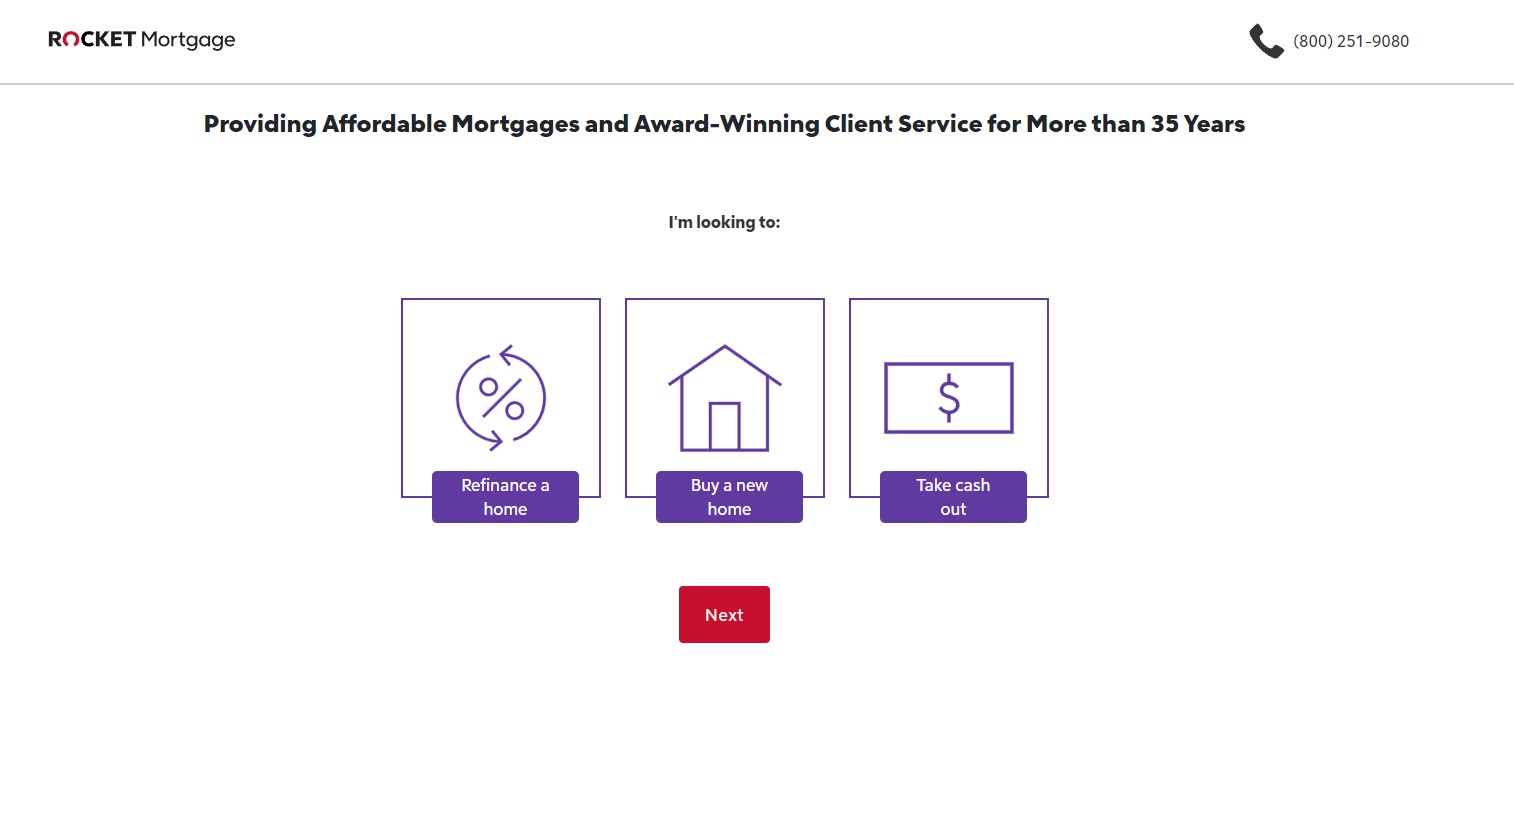 example of a rocket mortgage lead form